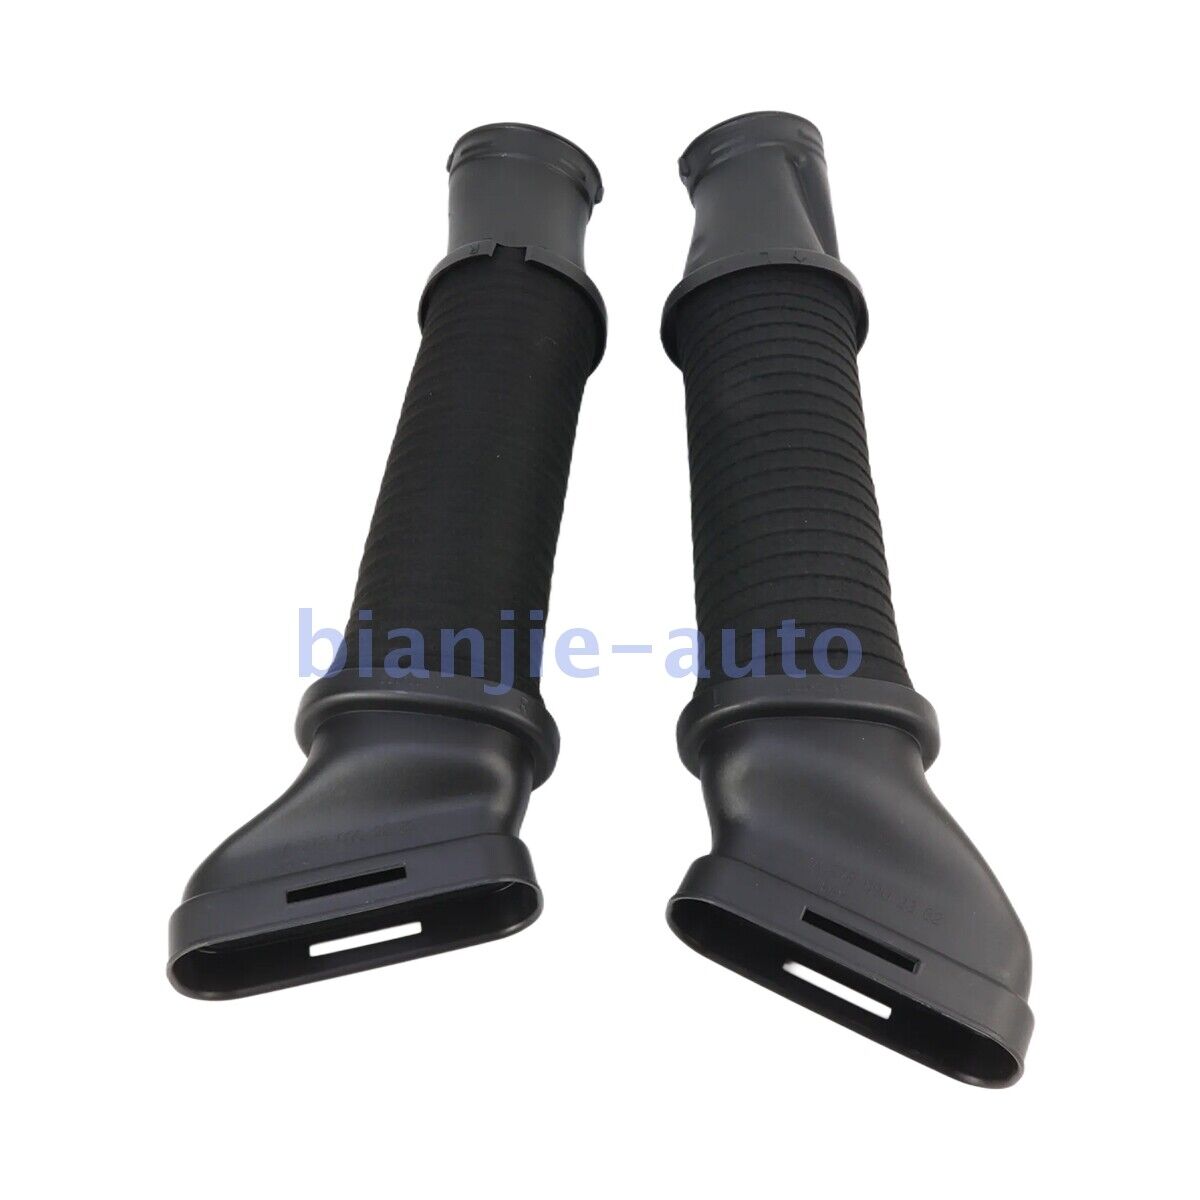 Pair Left & Right Air Intake Hose Pipe for Benz SL Class R231 M157 W231 SL63 AMG